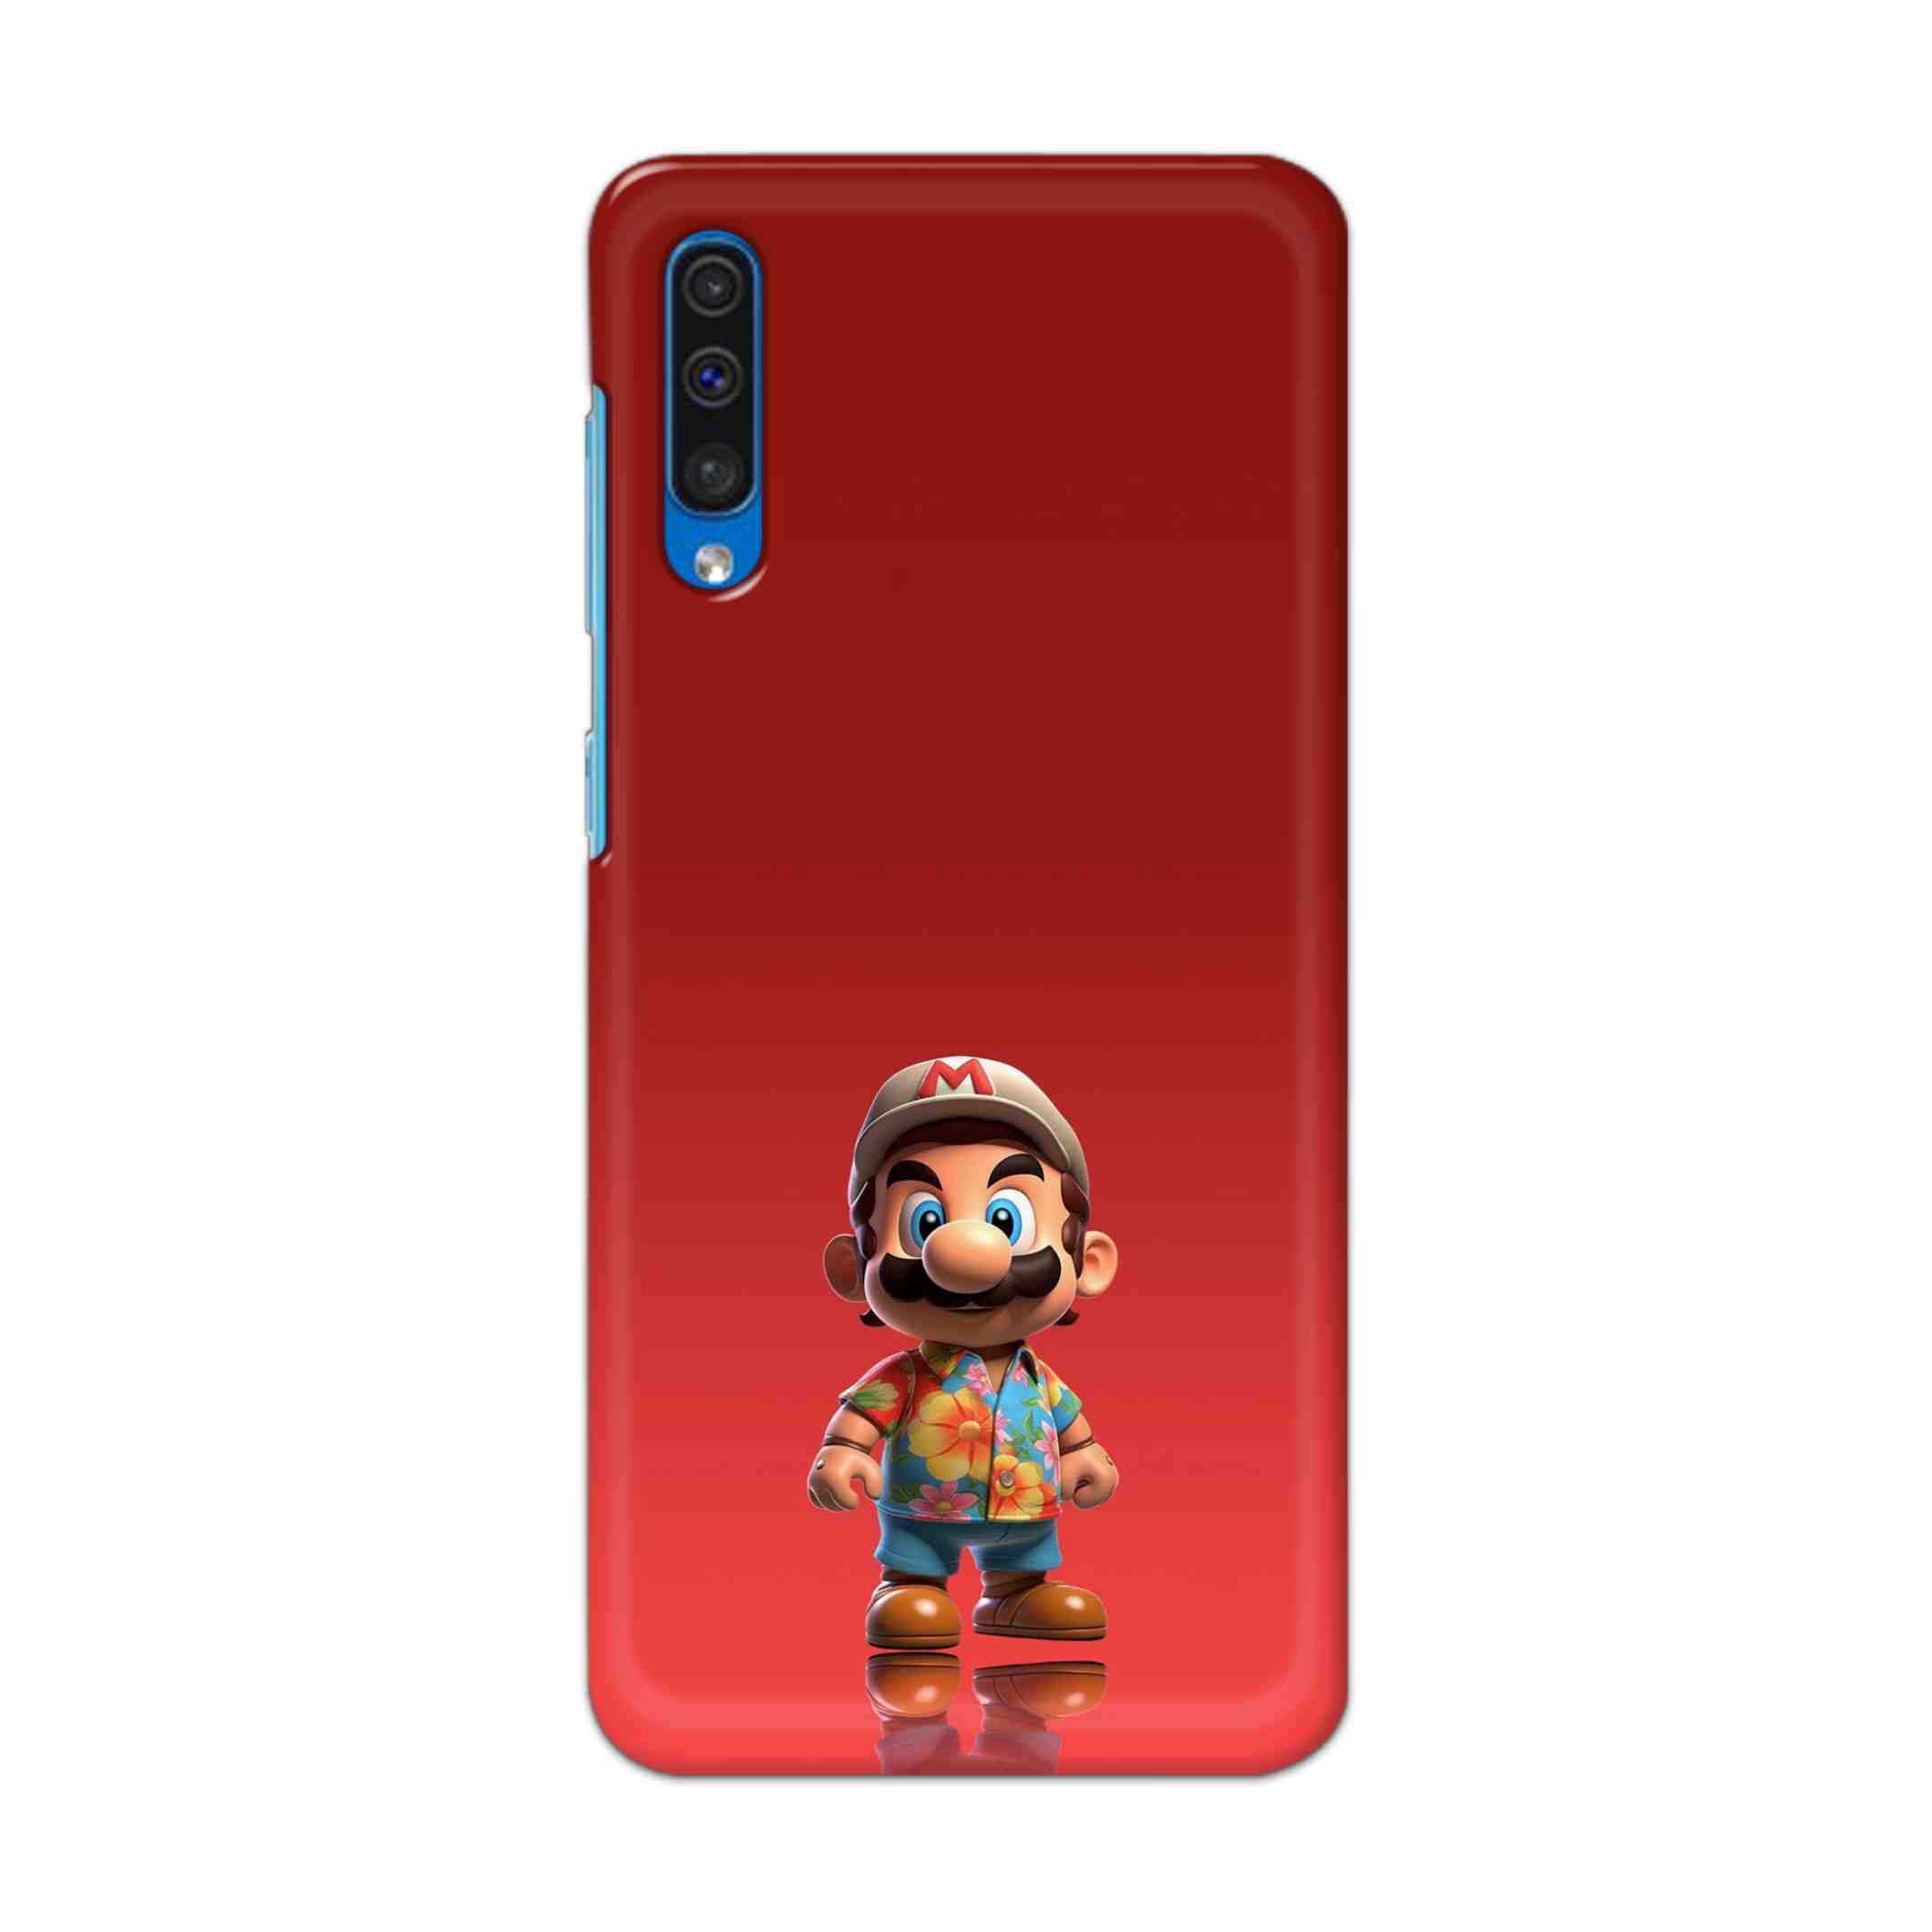 Buy Mario Hard Back Mobile Phone Case Cover For Samsung Galaxy A50 / A50s / A30s Online